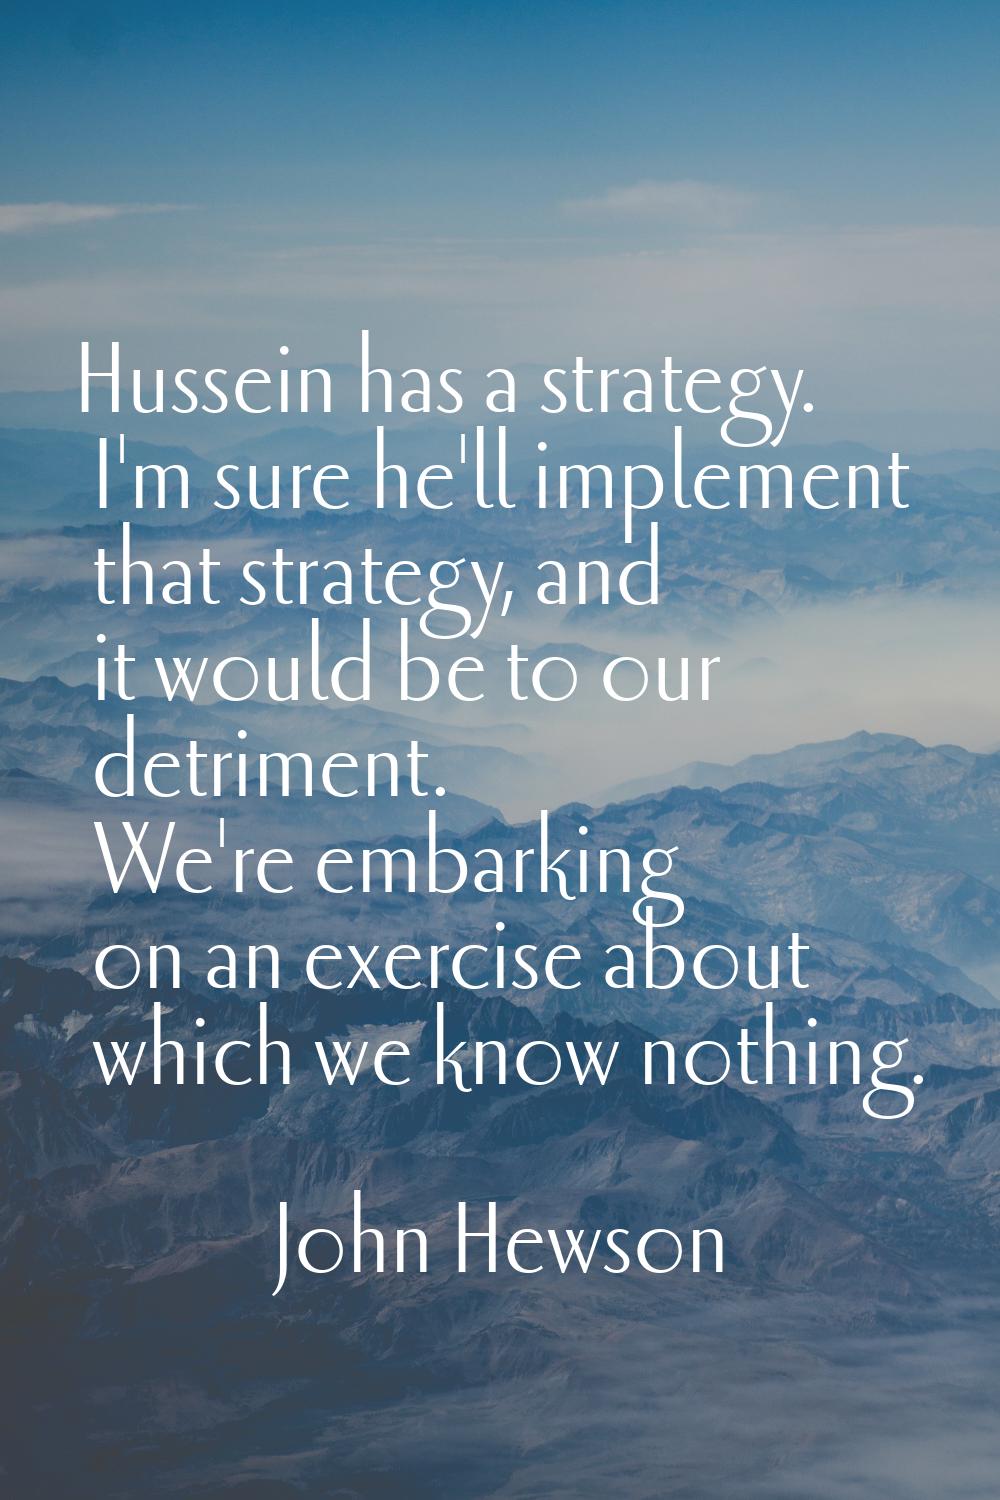 Hussein has a strategy. I'm sure he'll implement that strategy, and it would be to our detriment. W